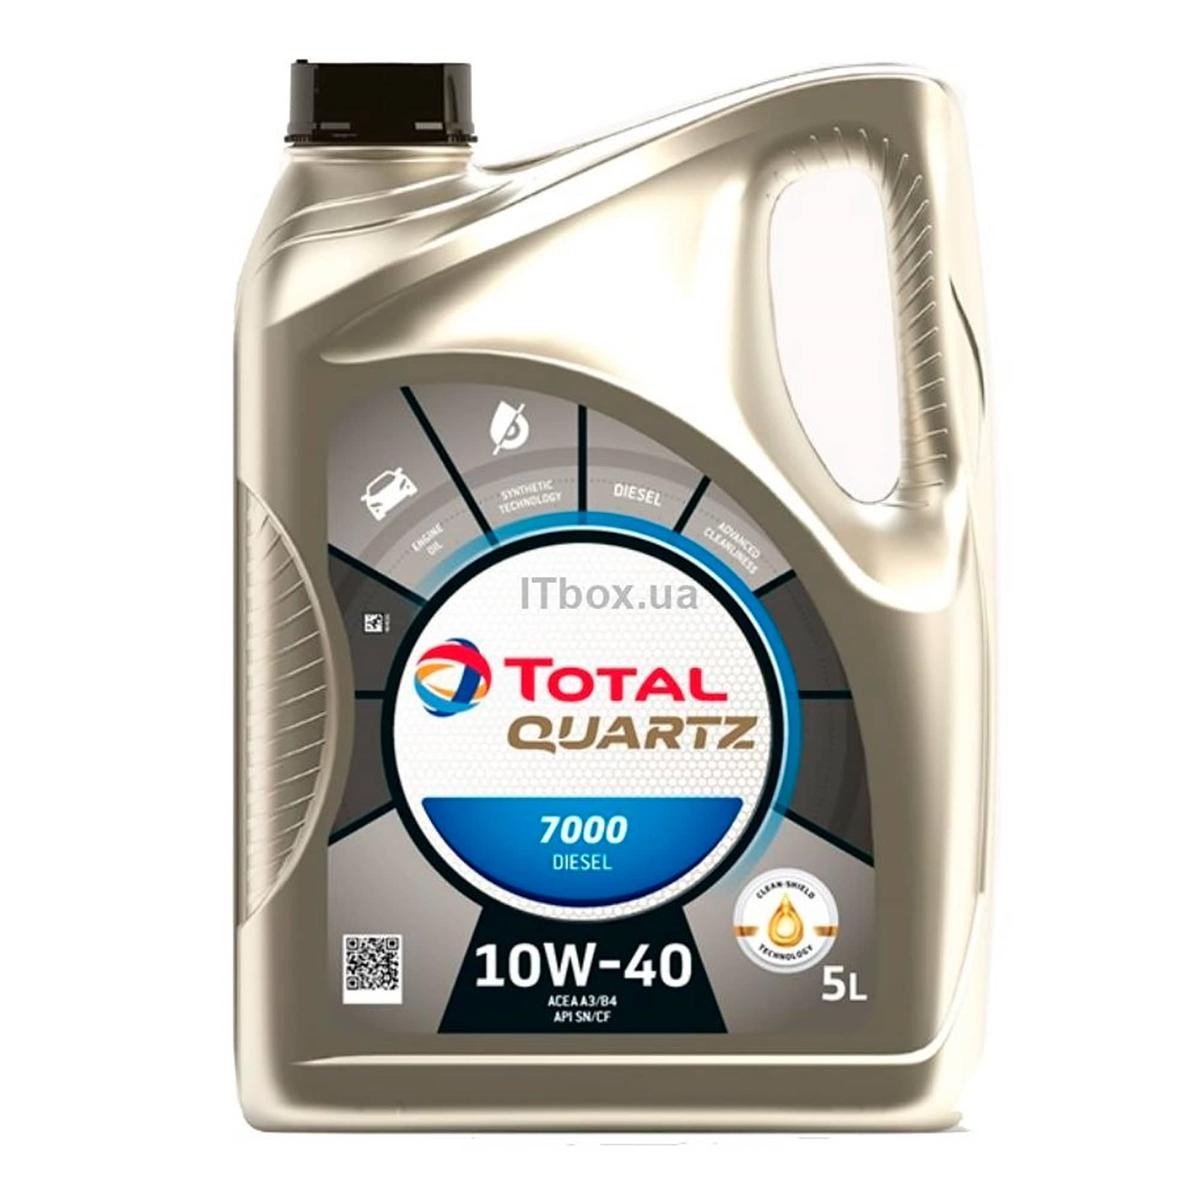 TOTAL Automobile oil diesel and petrol MERCEDES-BENZ 190 (W201) new 2202844